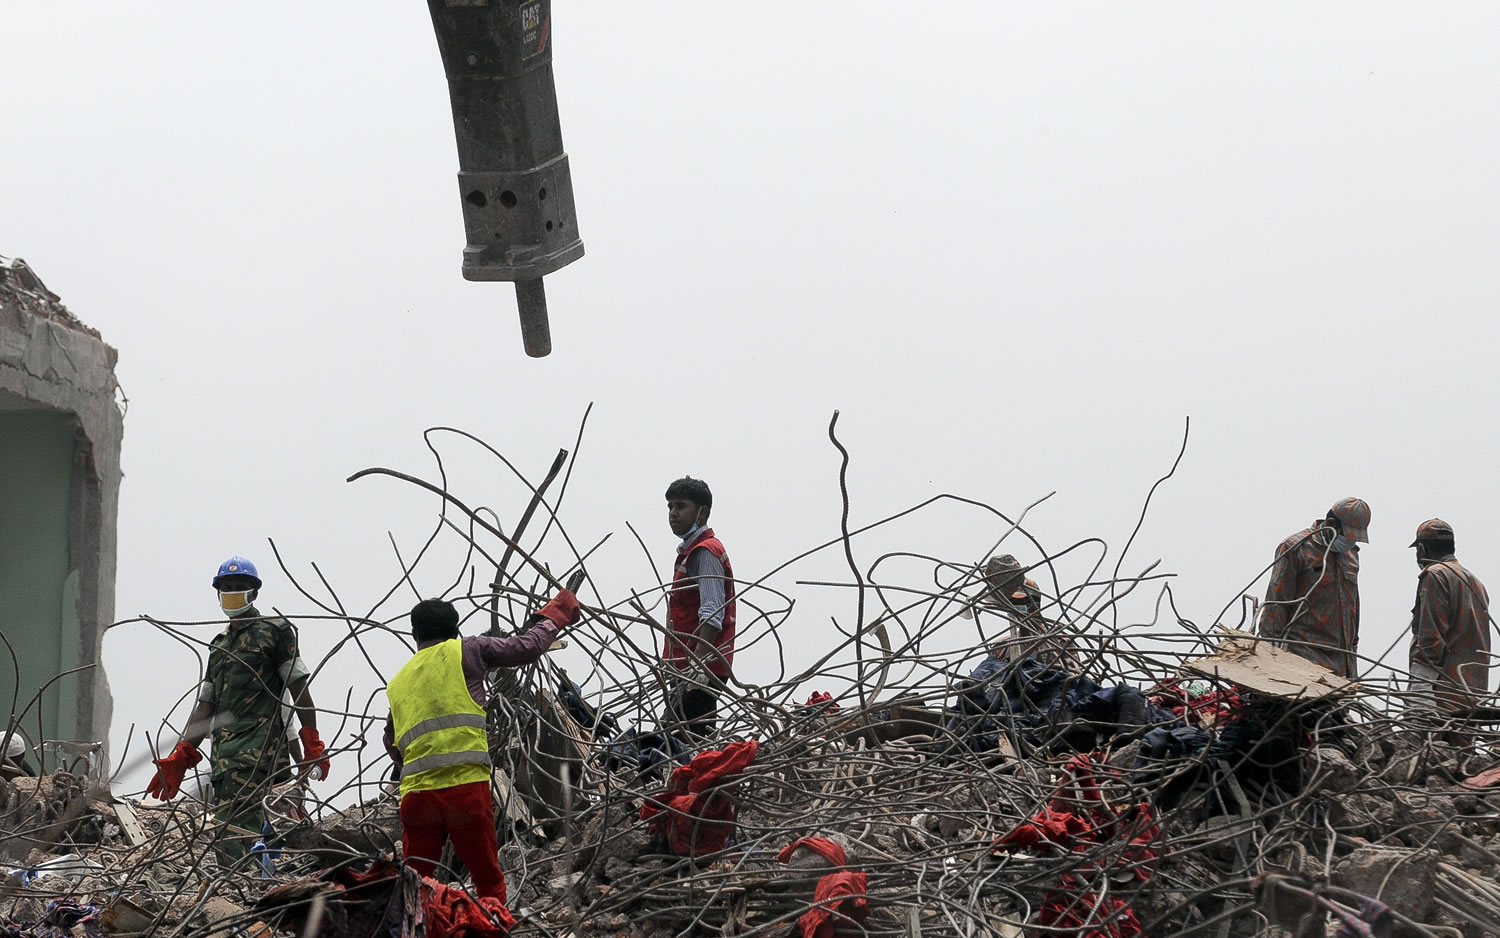 Rescuers work at the site of the eight-story Rana Plaza building that collapsed in Savar, near Dhaka, on Thursday.